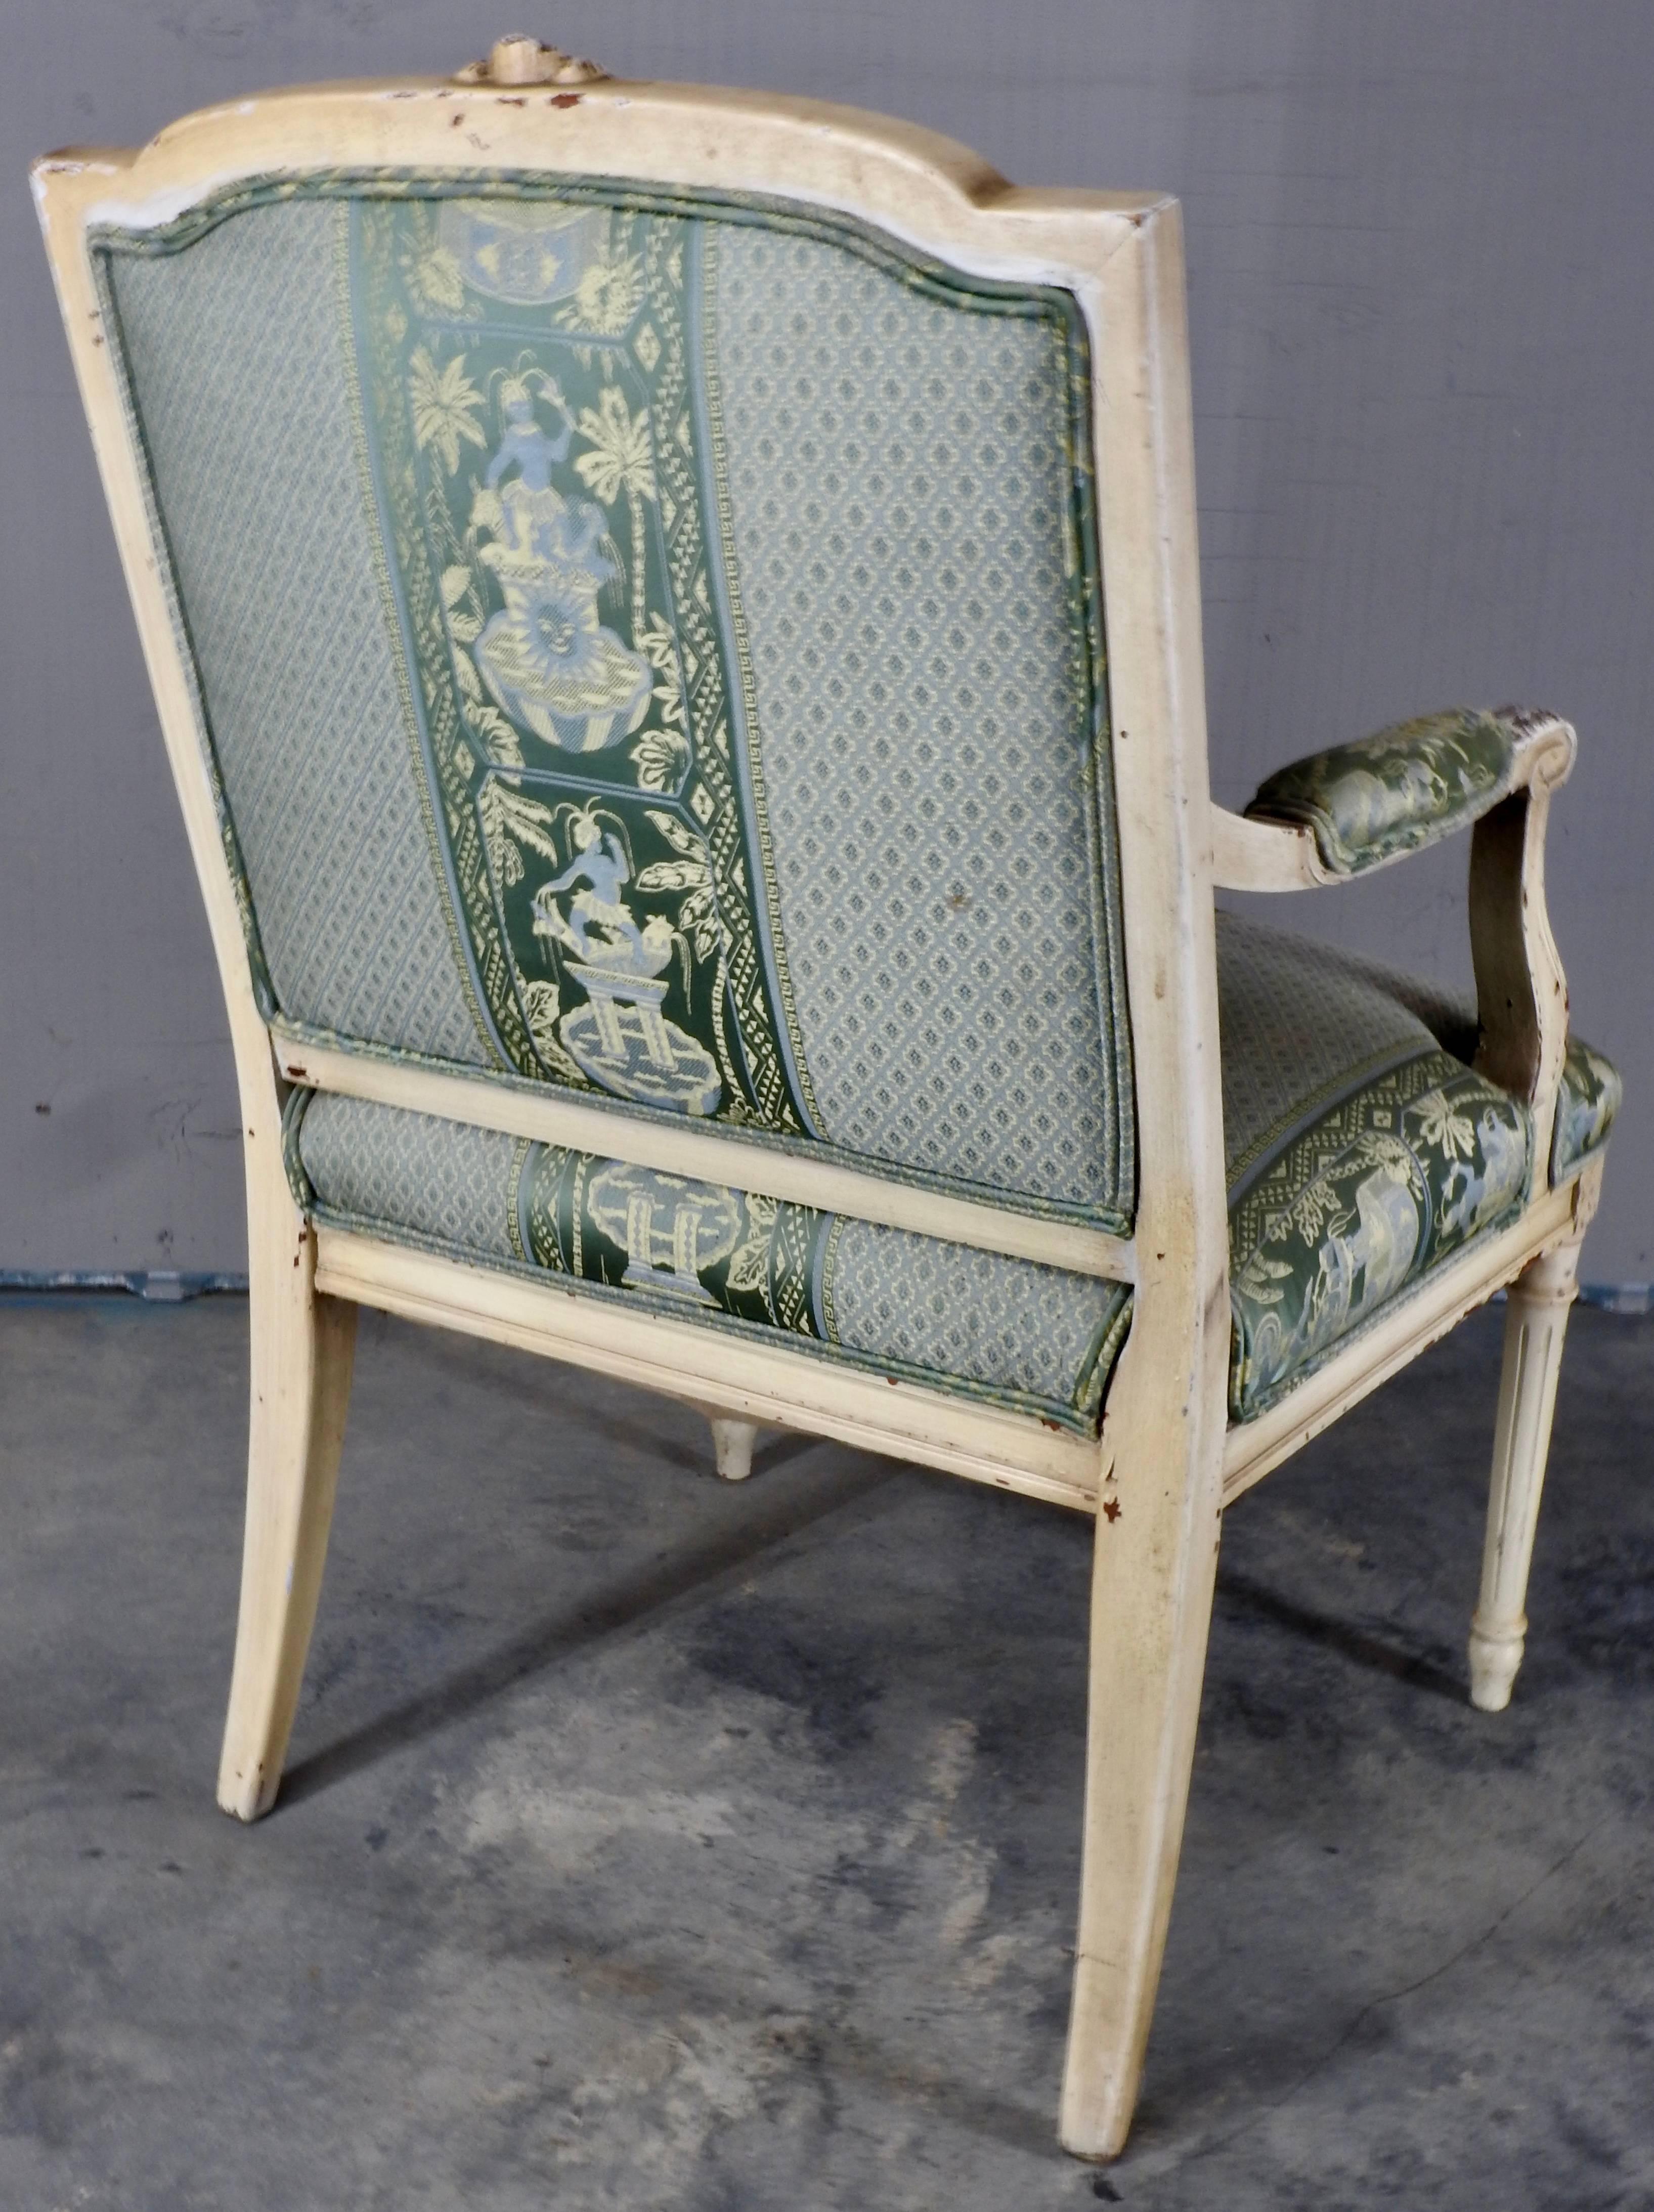 Distressed cream color paint highlights the details on this French fauteuil. The top of the chair features a bow with a trailing ribbon. The arms and legs have detailed carvings of floral and scrollwork. Soft green, blue and golden colors of the